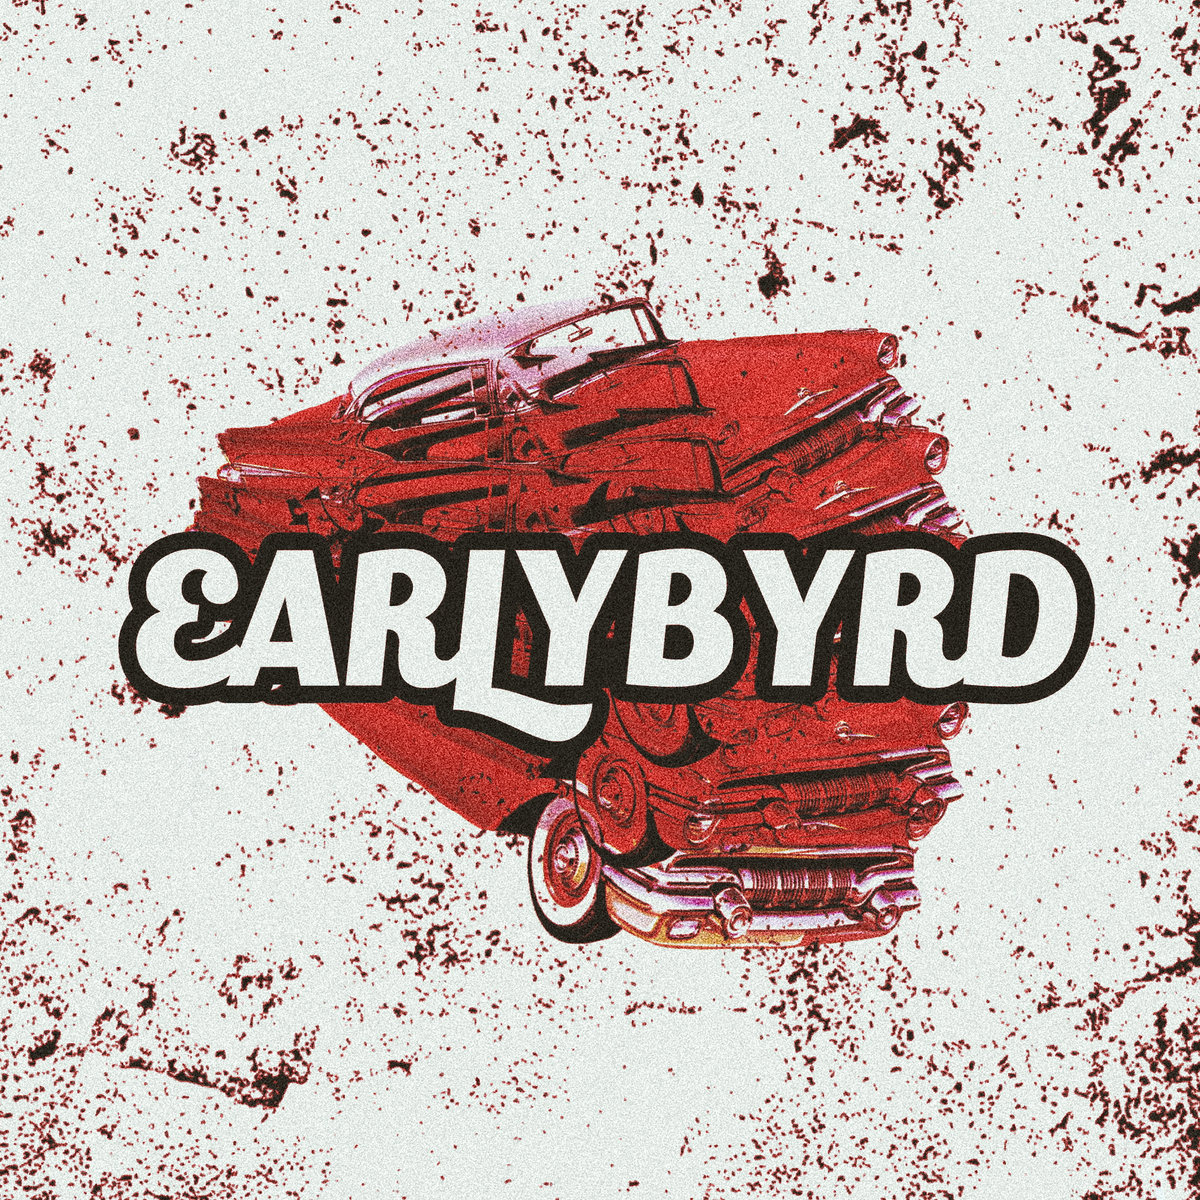 The Early Byrd 